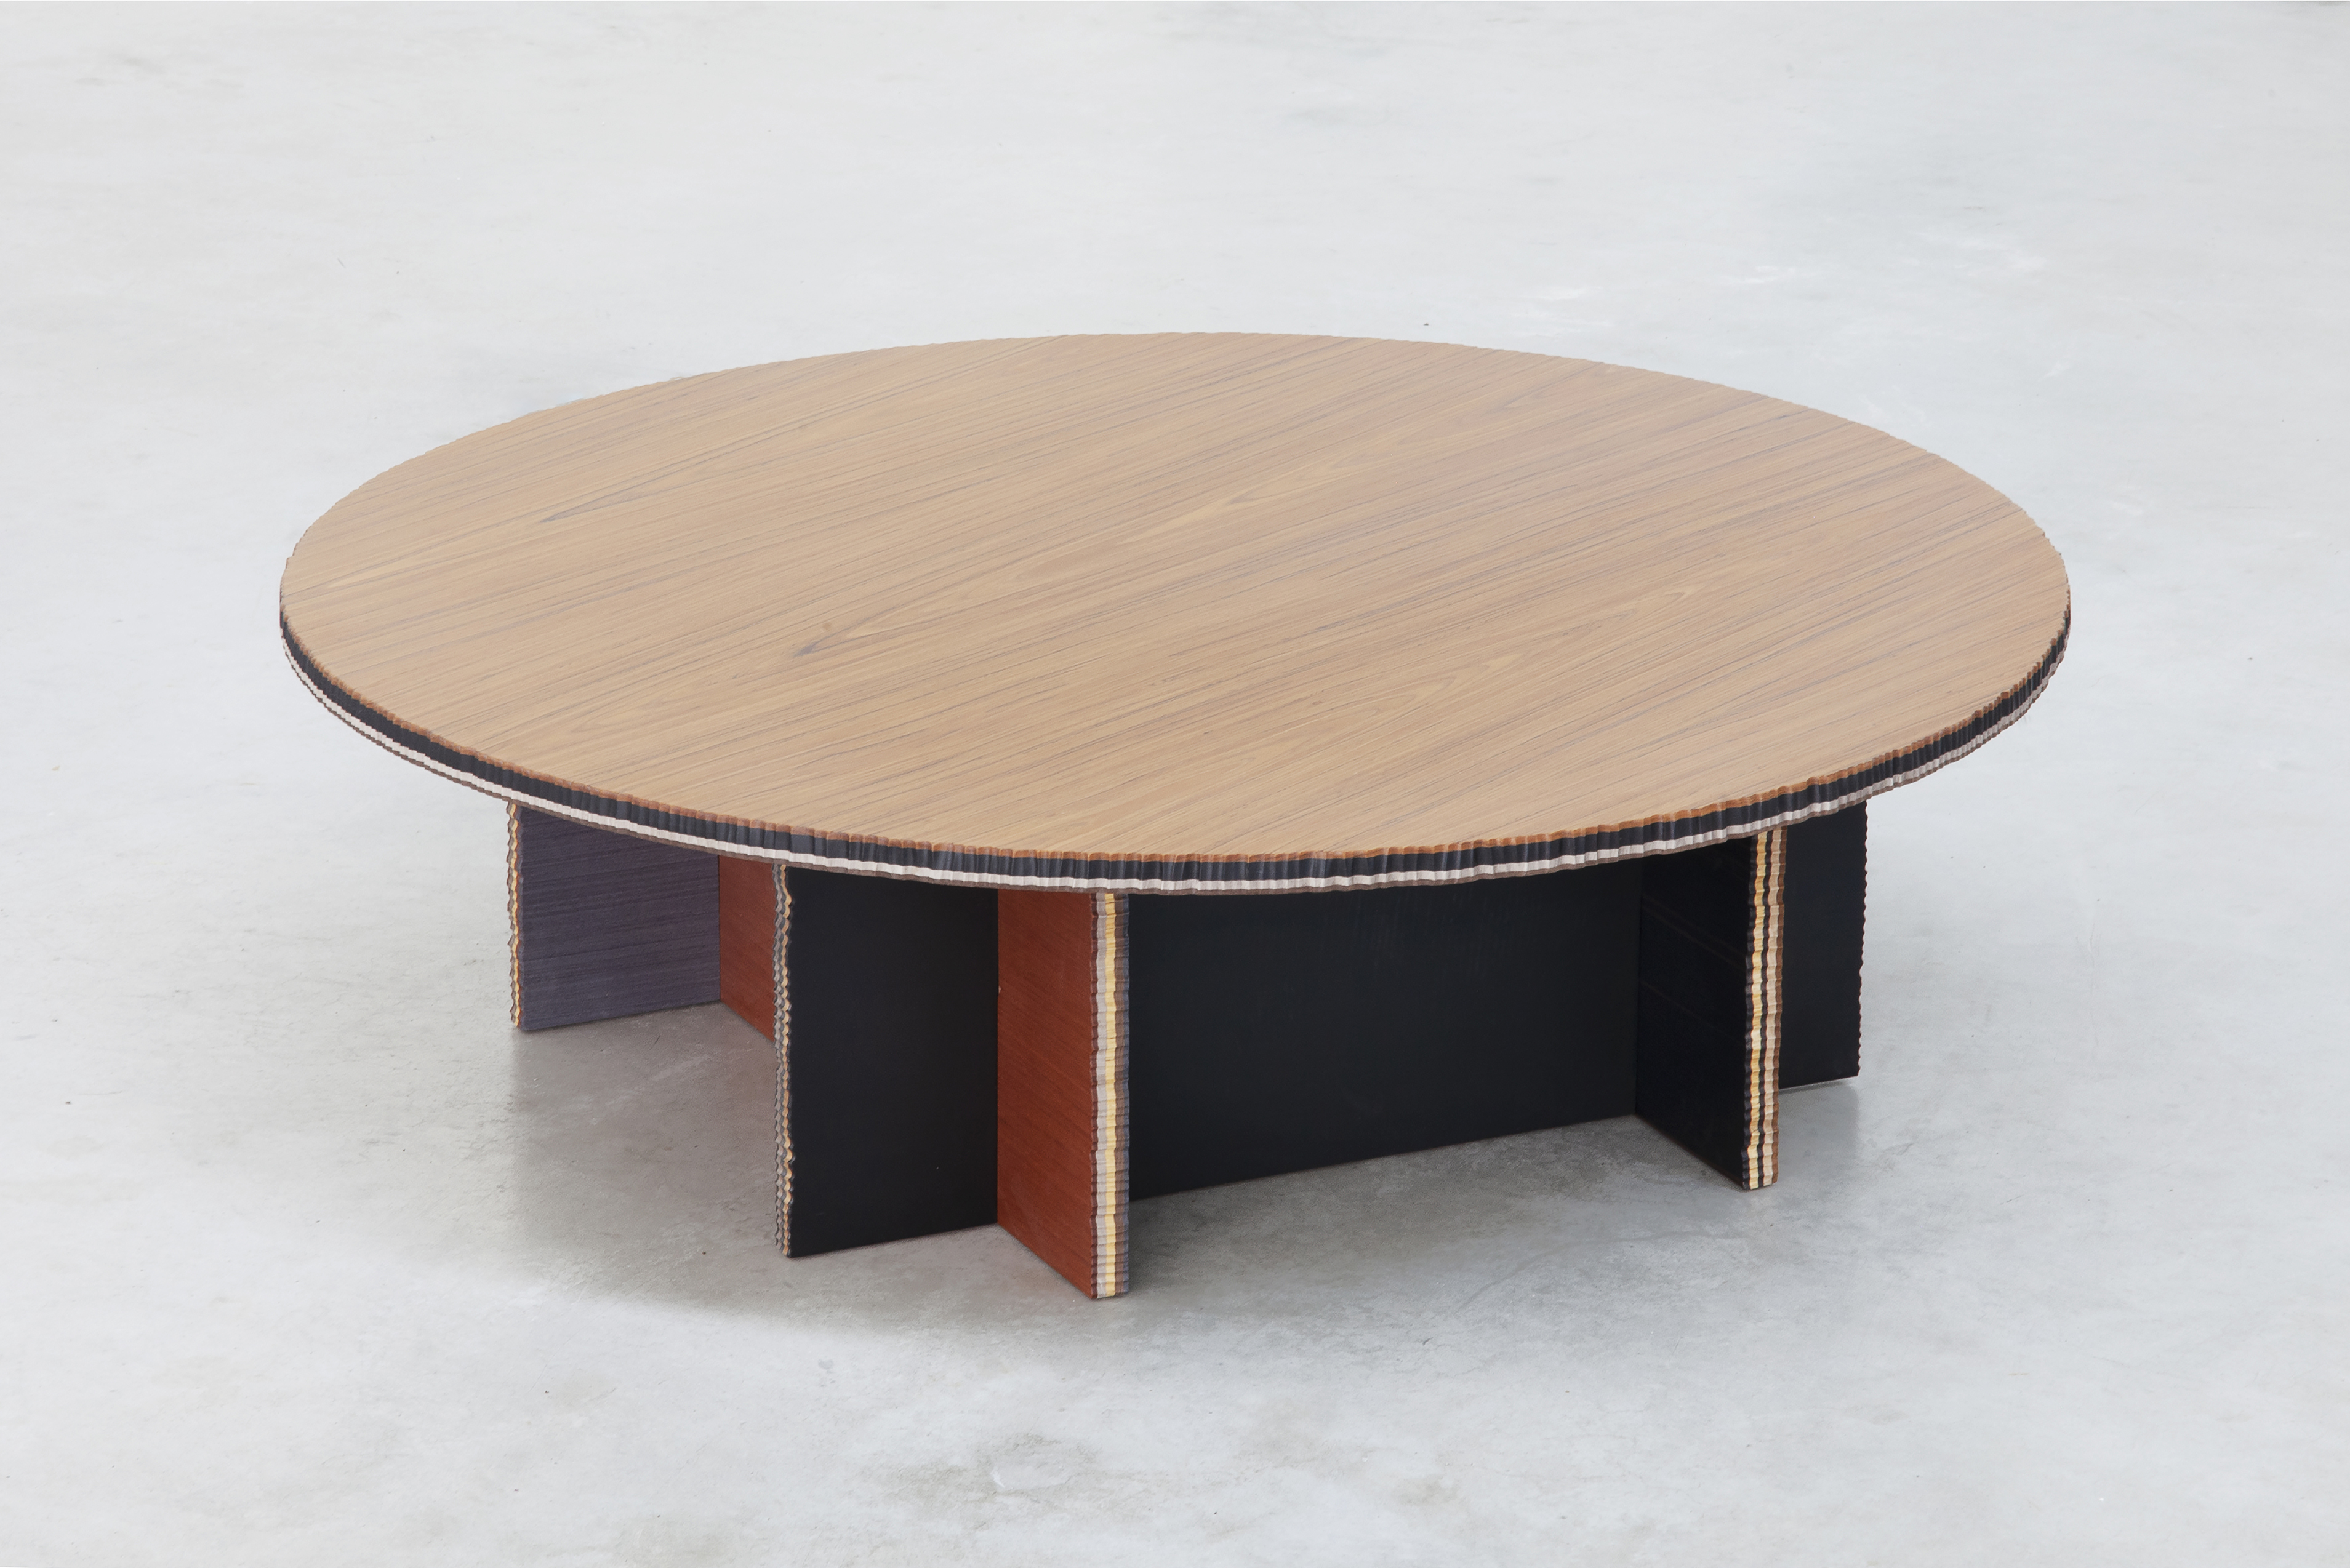 Marco Campardo designed George collection with reclaimed Alpi Wood and Seeds London Gallery